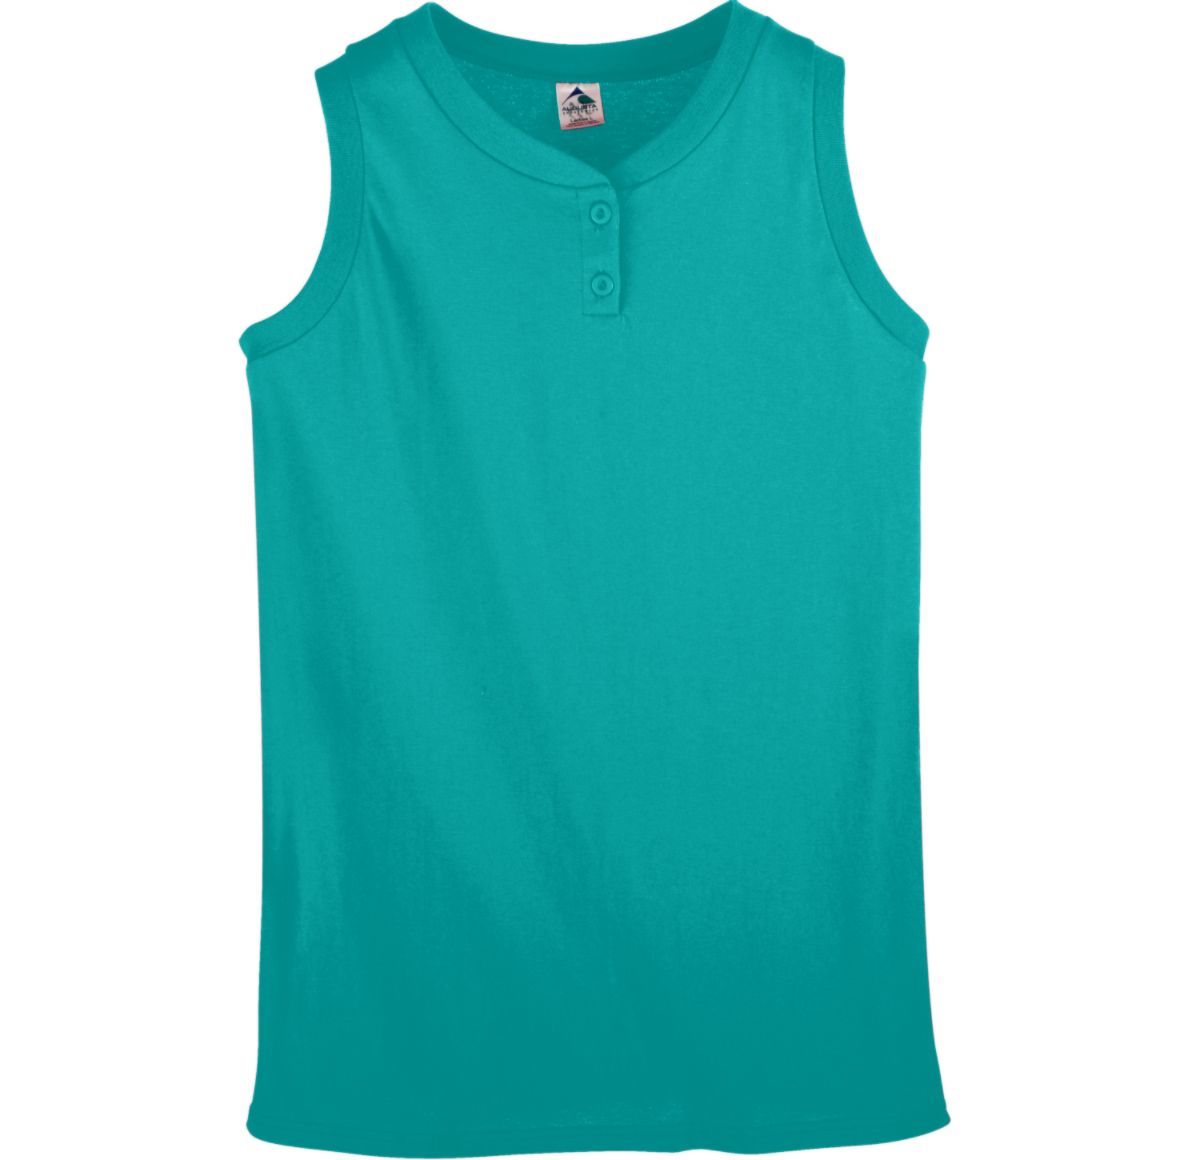 Augusta Sportswear Ladies Sleeveless Two Button Softball Jersey in Teal  -Part of the Ladies, Ladies-Jersey, Augusta-Products, Softball, Shirts product lines at KanaleyCreations.com